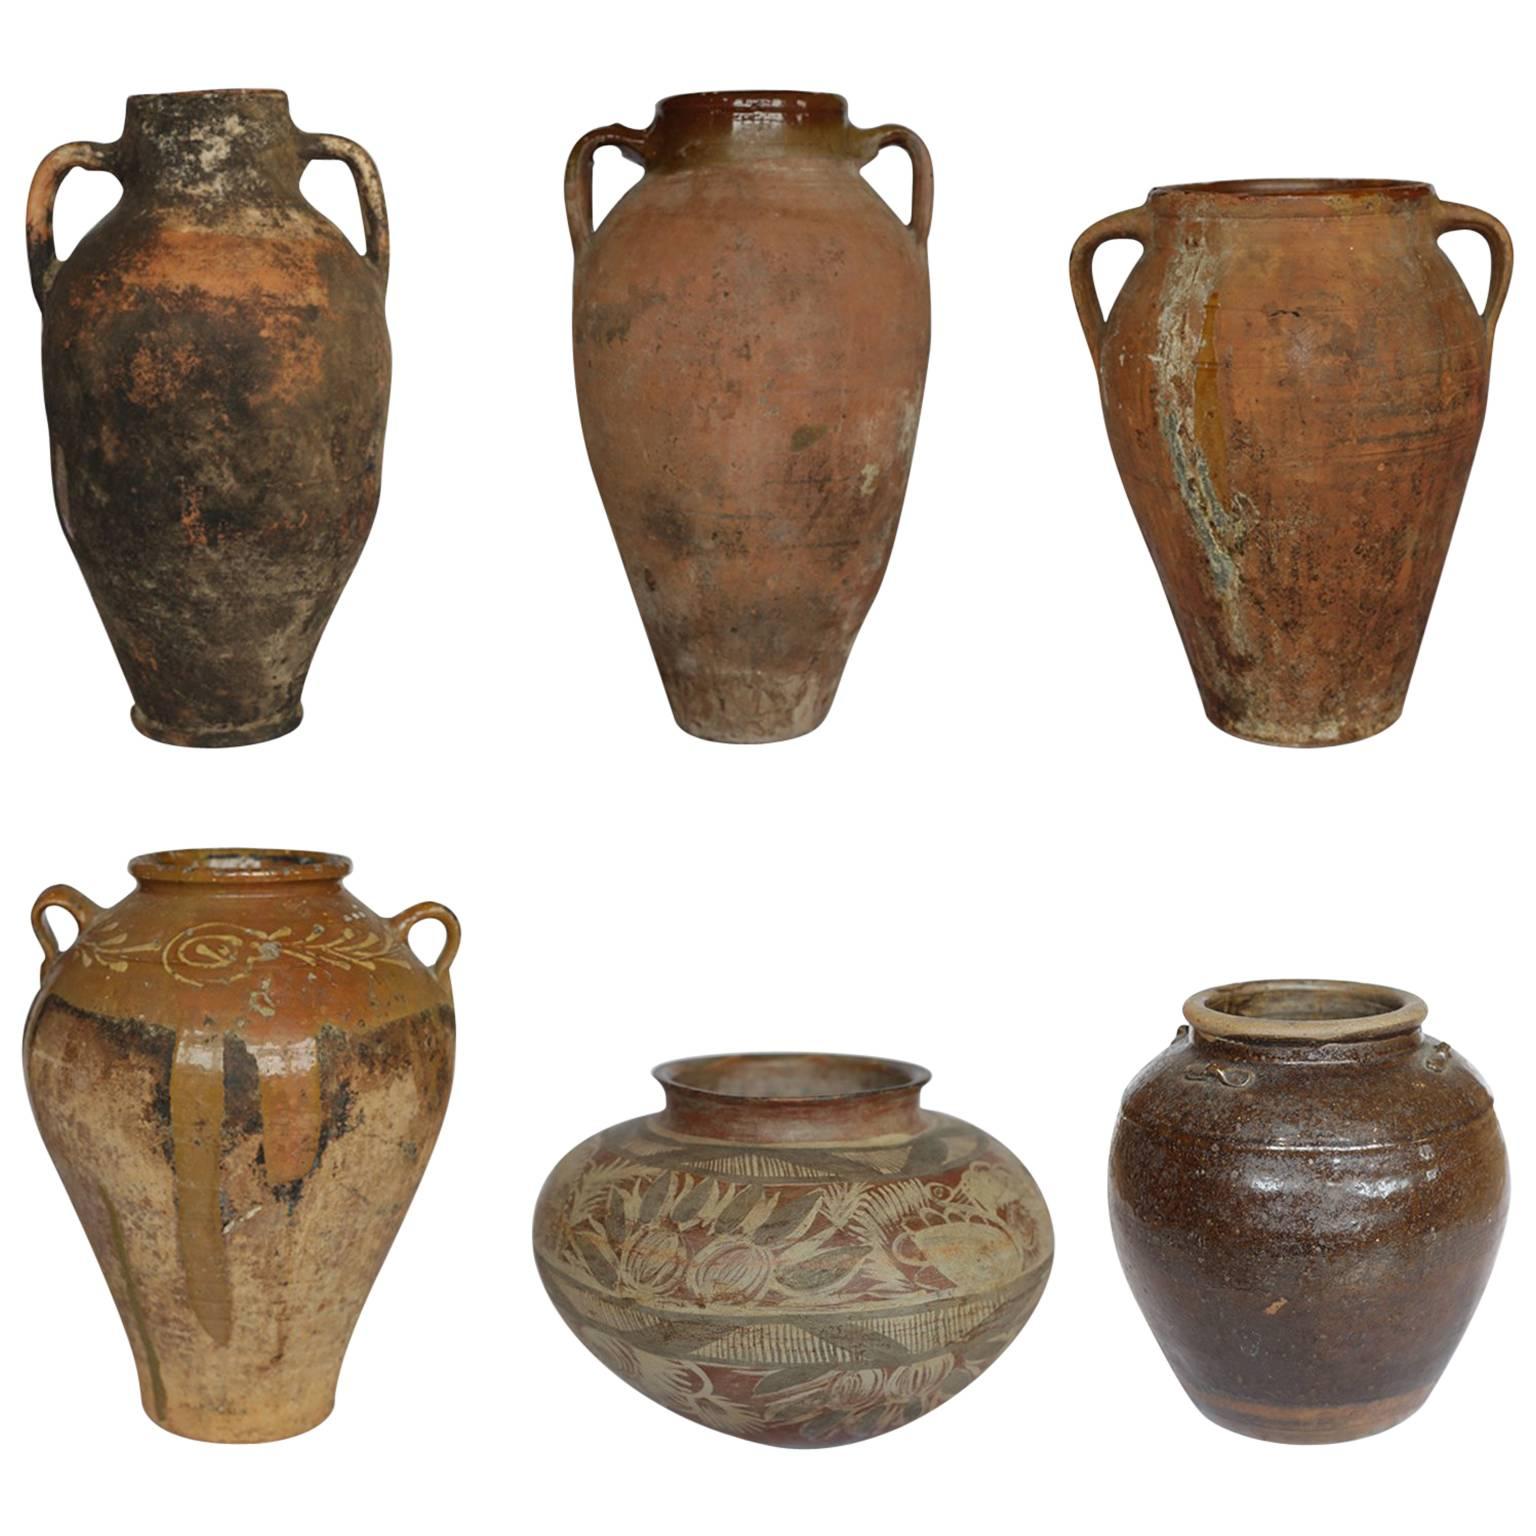 Early 19th/20th c. Antique Clay Jar Collection, c. 1810-1910